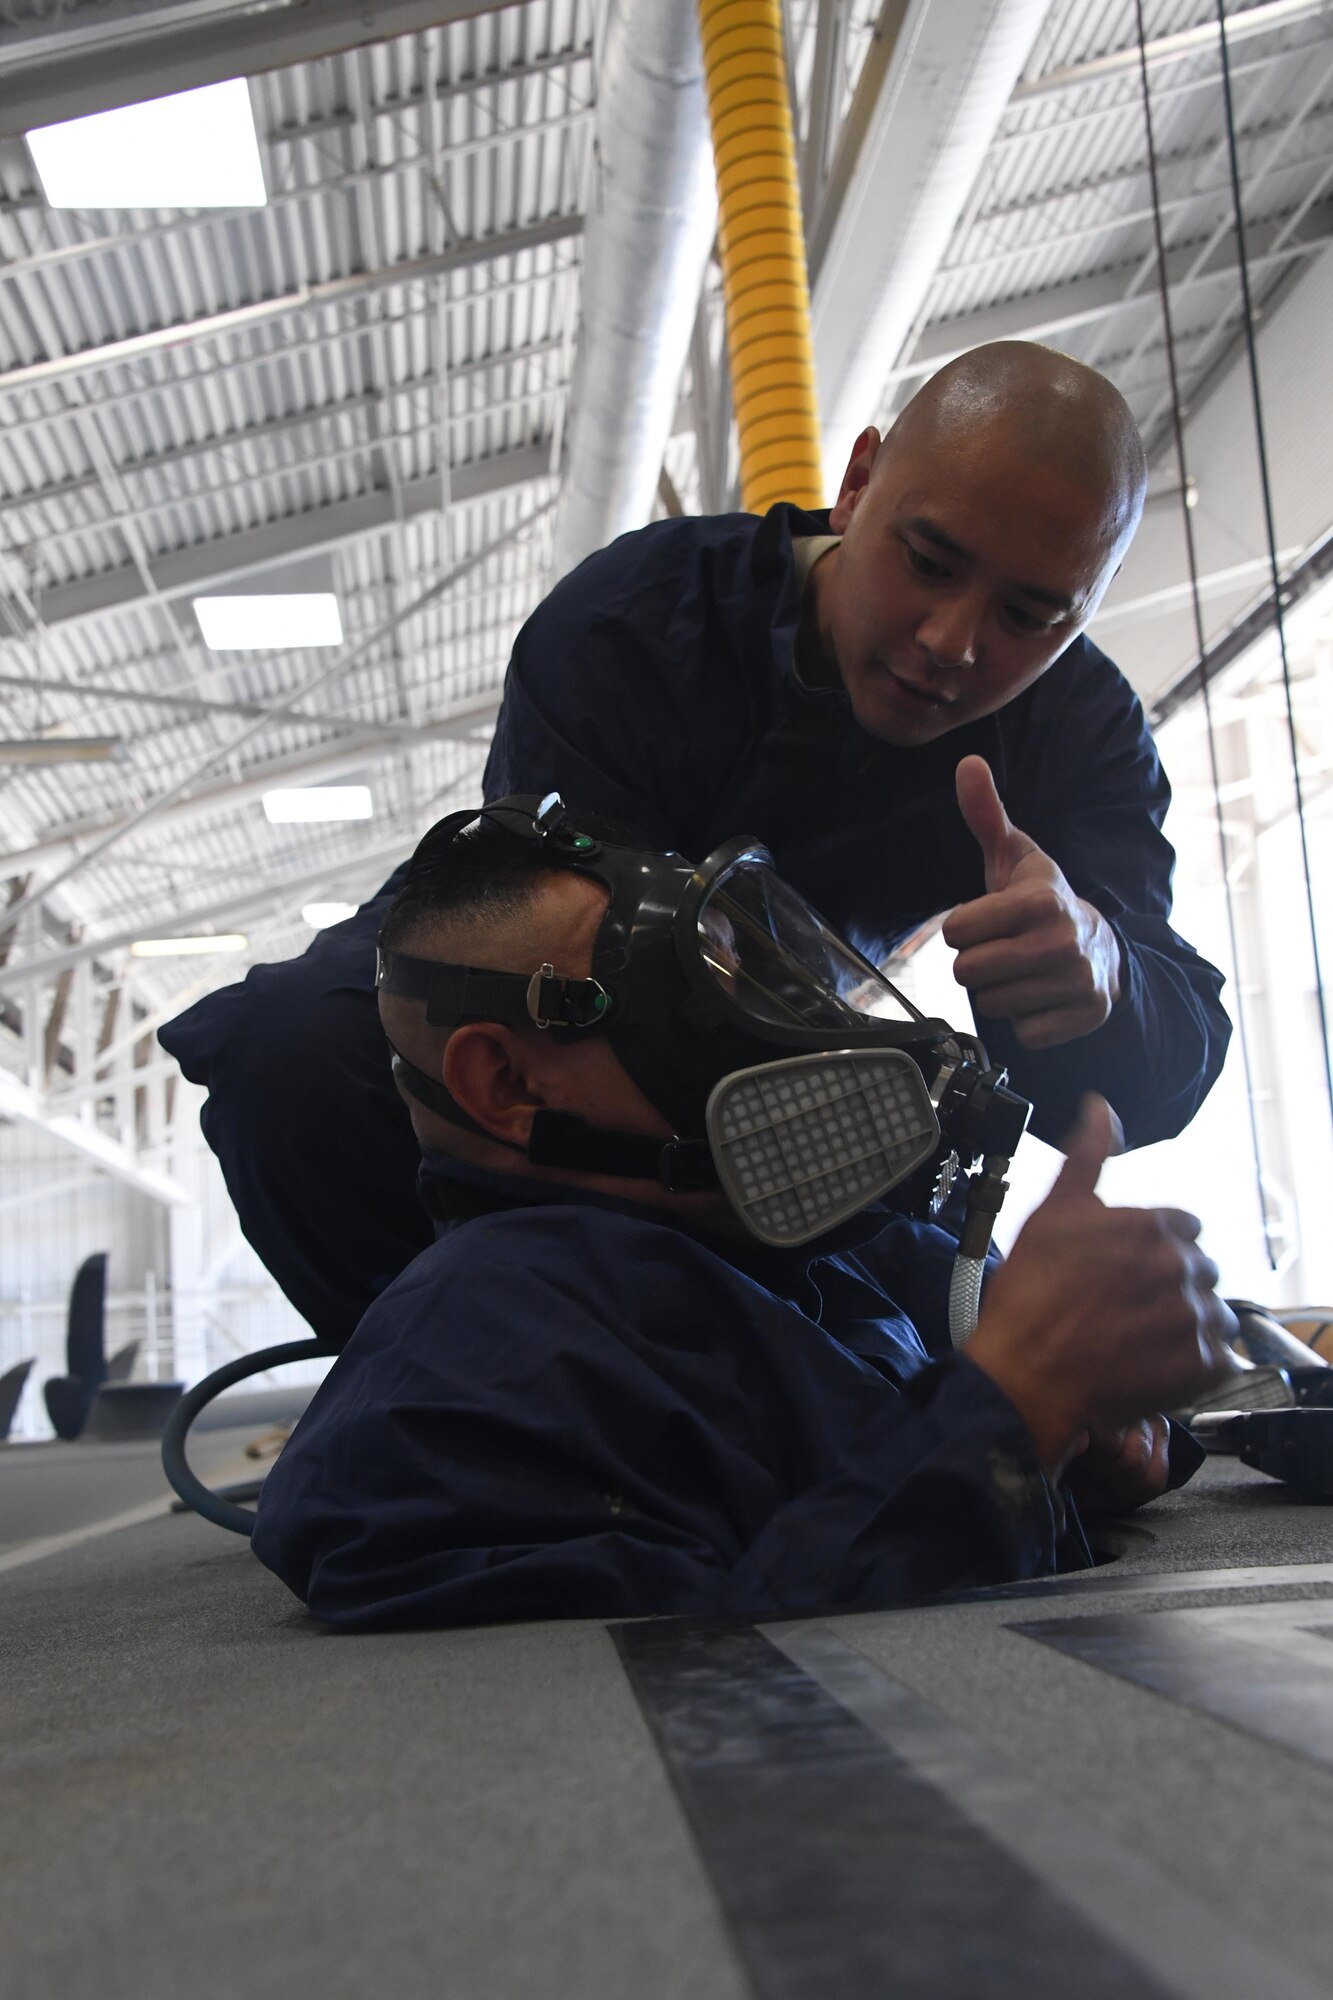 U.S. Air National Guard members Senior Airman Allan Tan assists Senior Airman Pedro Pescador with the 146th Airlift Wing’s Aircraft Fuel Systems Maintenance Squadron as he inserts himself into inside of a wing of a C-130J aircraft for a “confined space rescue exercise” at the Channel Islands Air National Guard Station Port Hueneme, Calif. April 1, 2017. During a confined space rescue exercise, first-responders with the 146th Airlift Wing’s Aircraft Fuel Systems Maintenance Squadron and Federal Fire Ventura County firefighters run through the critical emergency operations that would take place if a fuel-cell maintenance worker were to become incapacitated while working inside the very small fuel tanks inside the aircraft’s wings. (U.S. Air National Guard photo by: Staff Sgt. Nieko Carzis.)